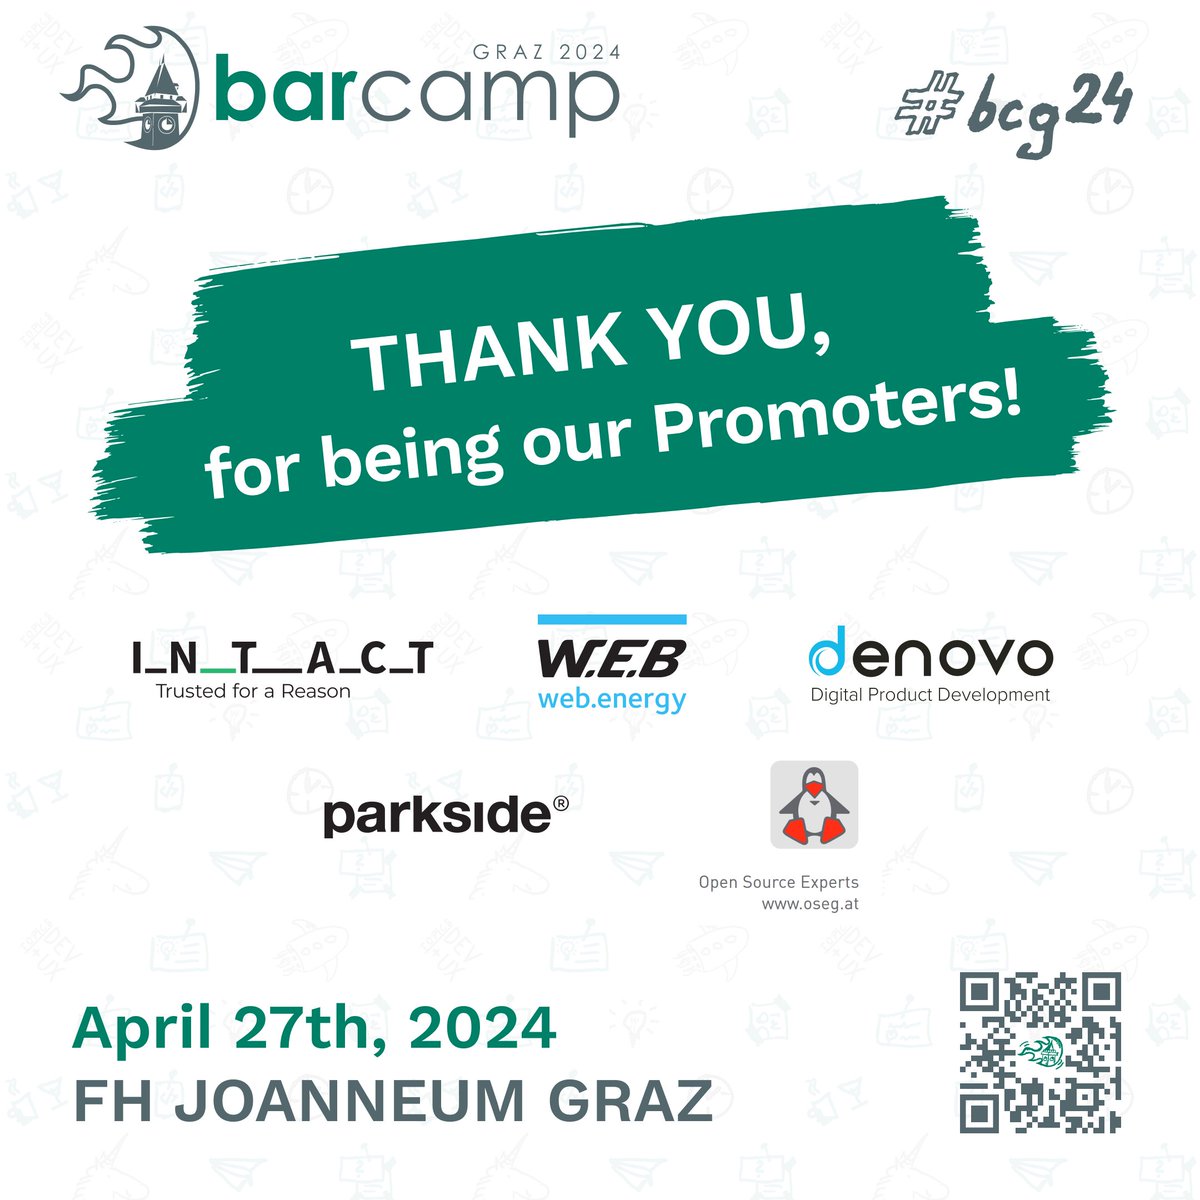 🌟 Shout out to our incredible promoter sponsors! Thanks to your enthusiastic promotion, #bcg24 will be a sensational event.

Together, let's make this Barcamp Graz truly remarkable! 🎉🚀

#bcg24 #barcamp #graz #fhjoanneum
#thinkoutsidethebox #nonstoplearning #ux #userexperience